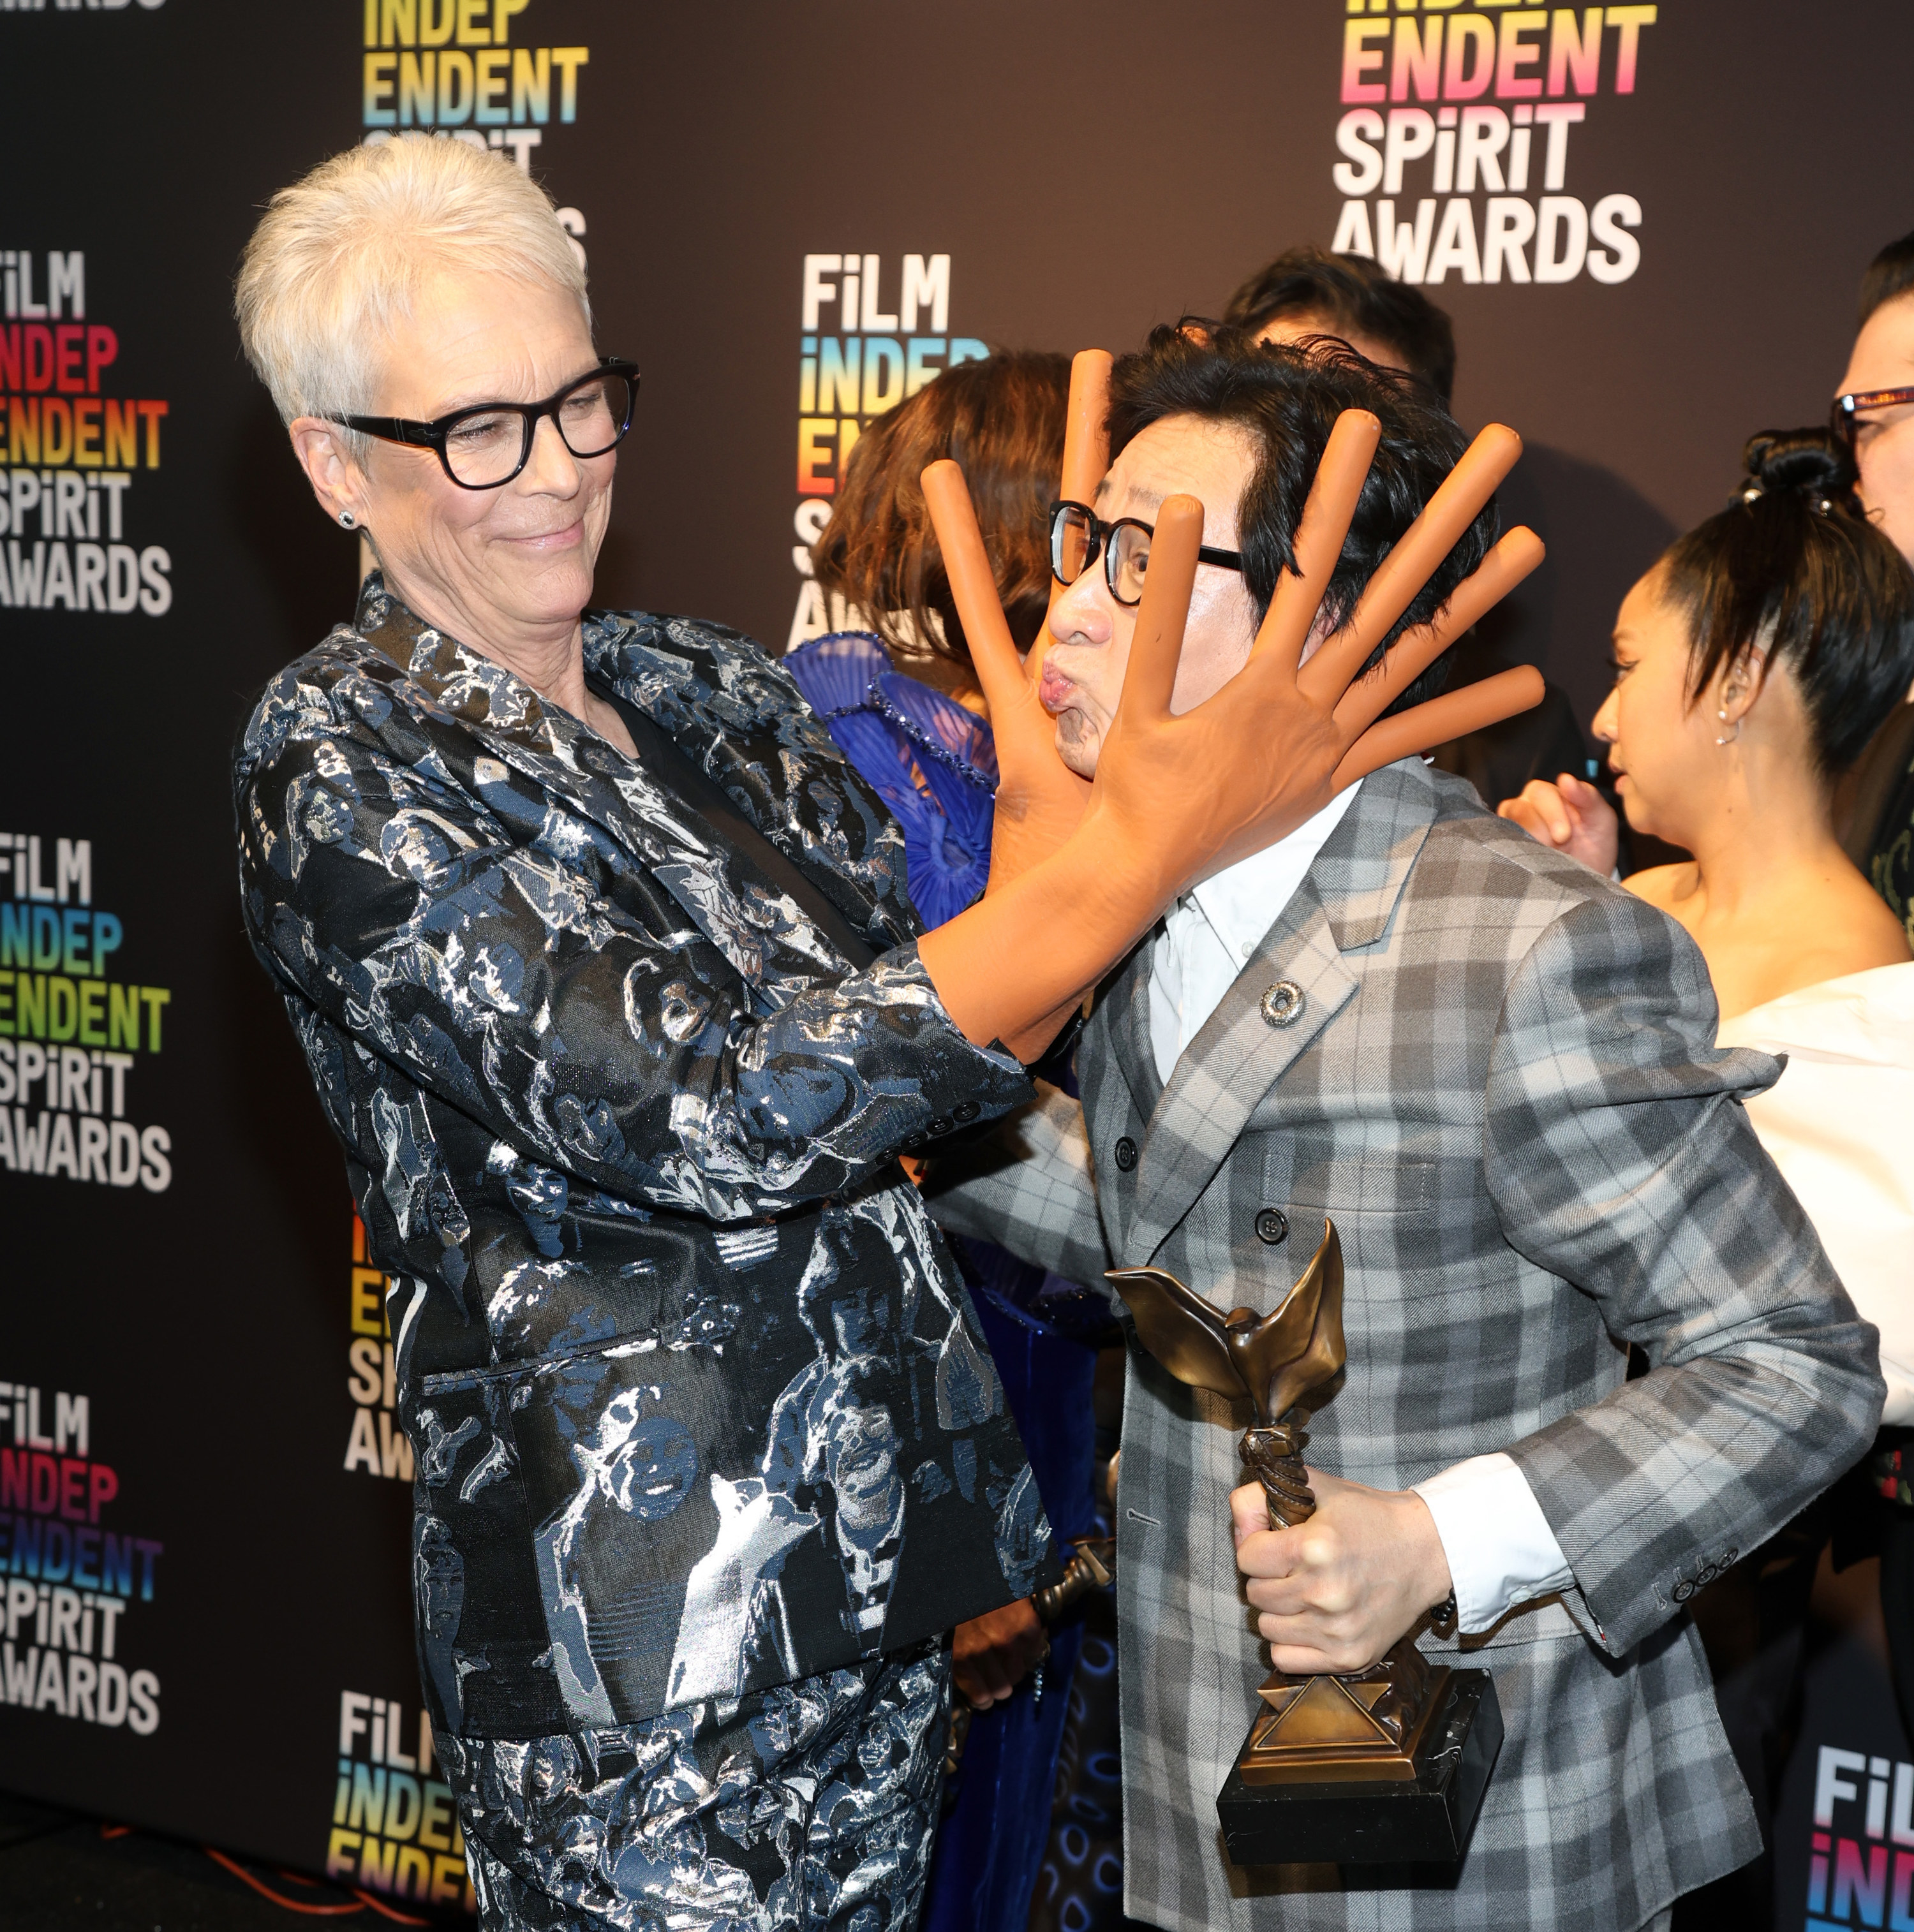 Jamie, with hot dog fingers, messing with fellow cast member Ke Huy Quan on the red carpet